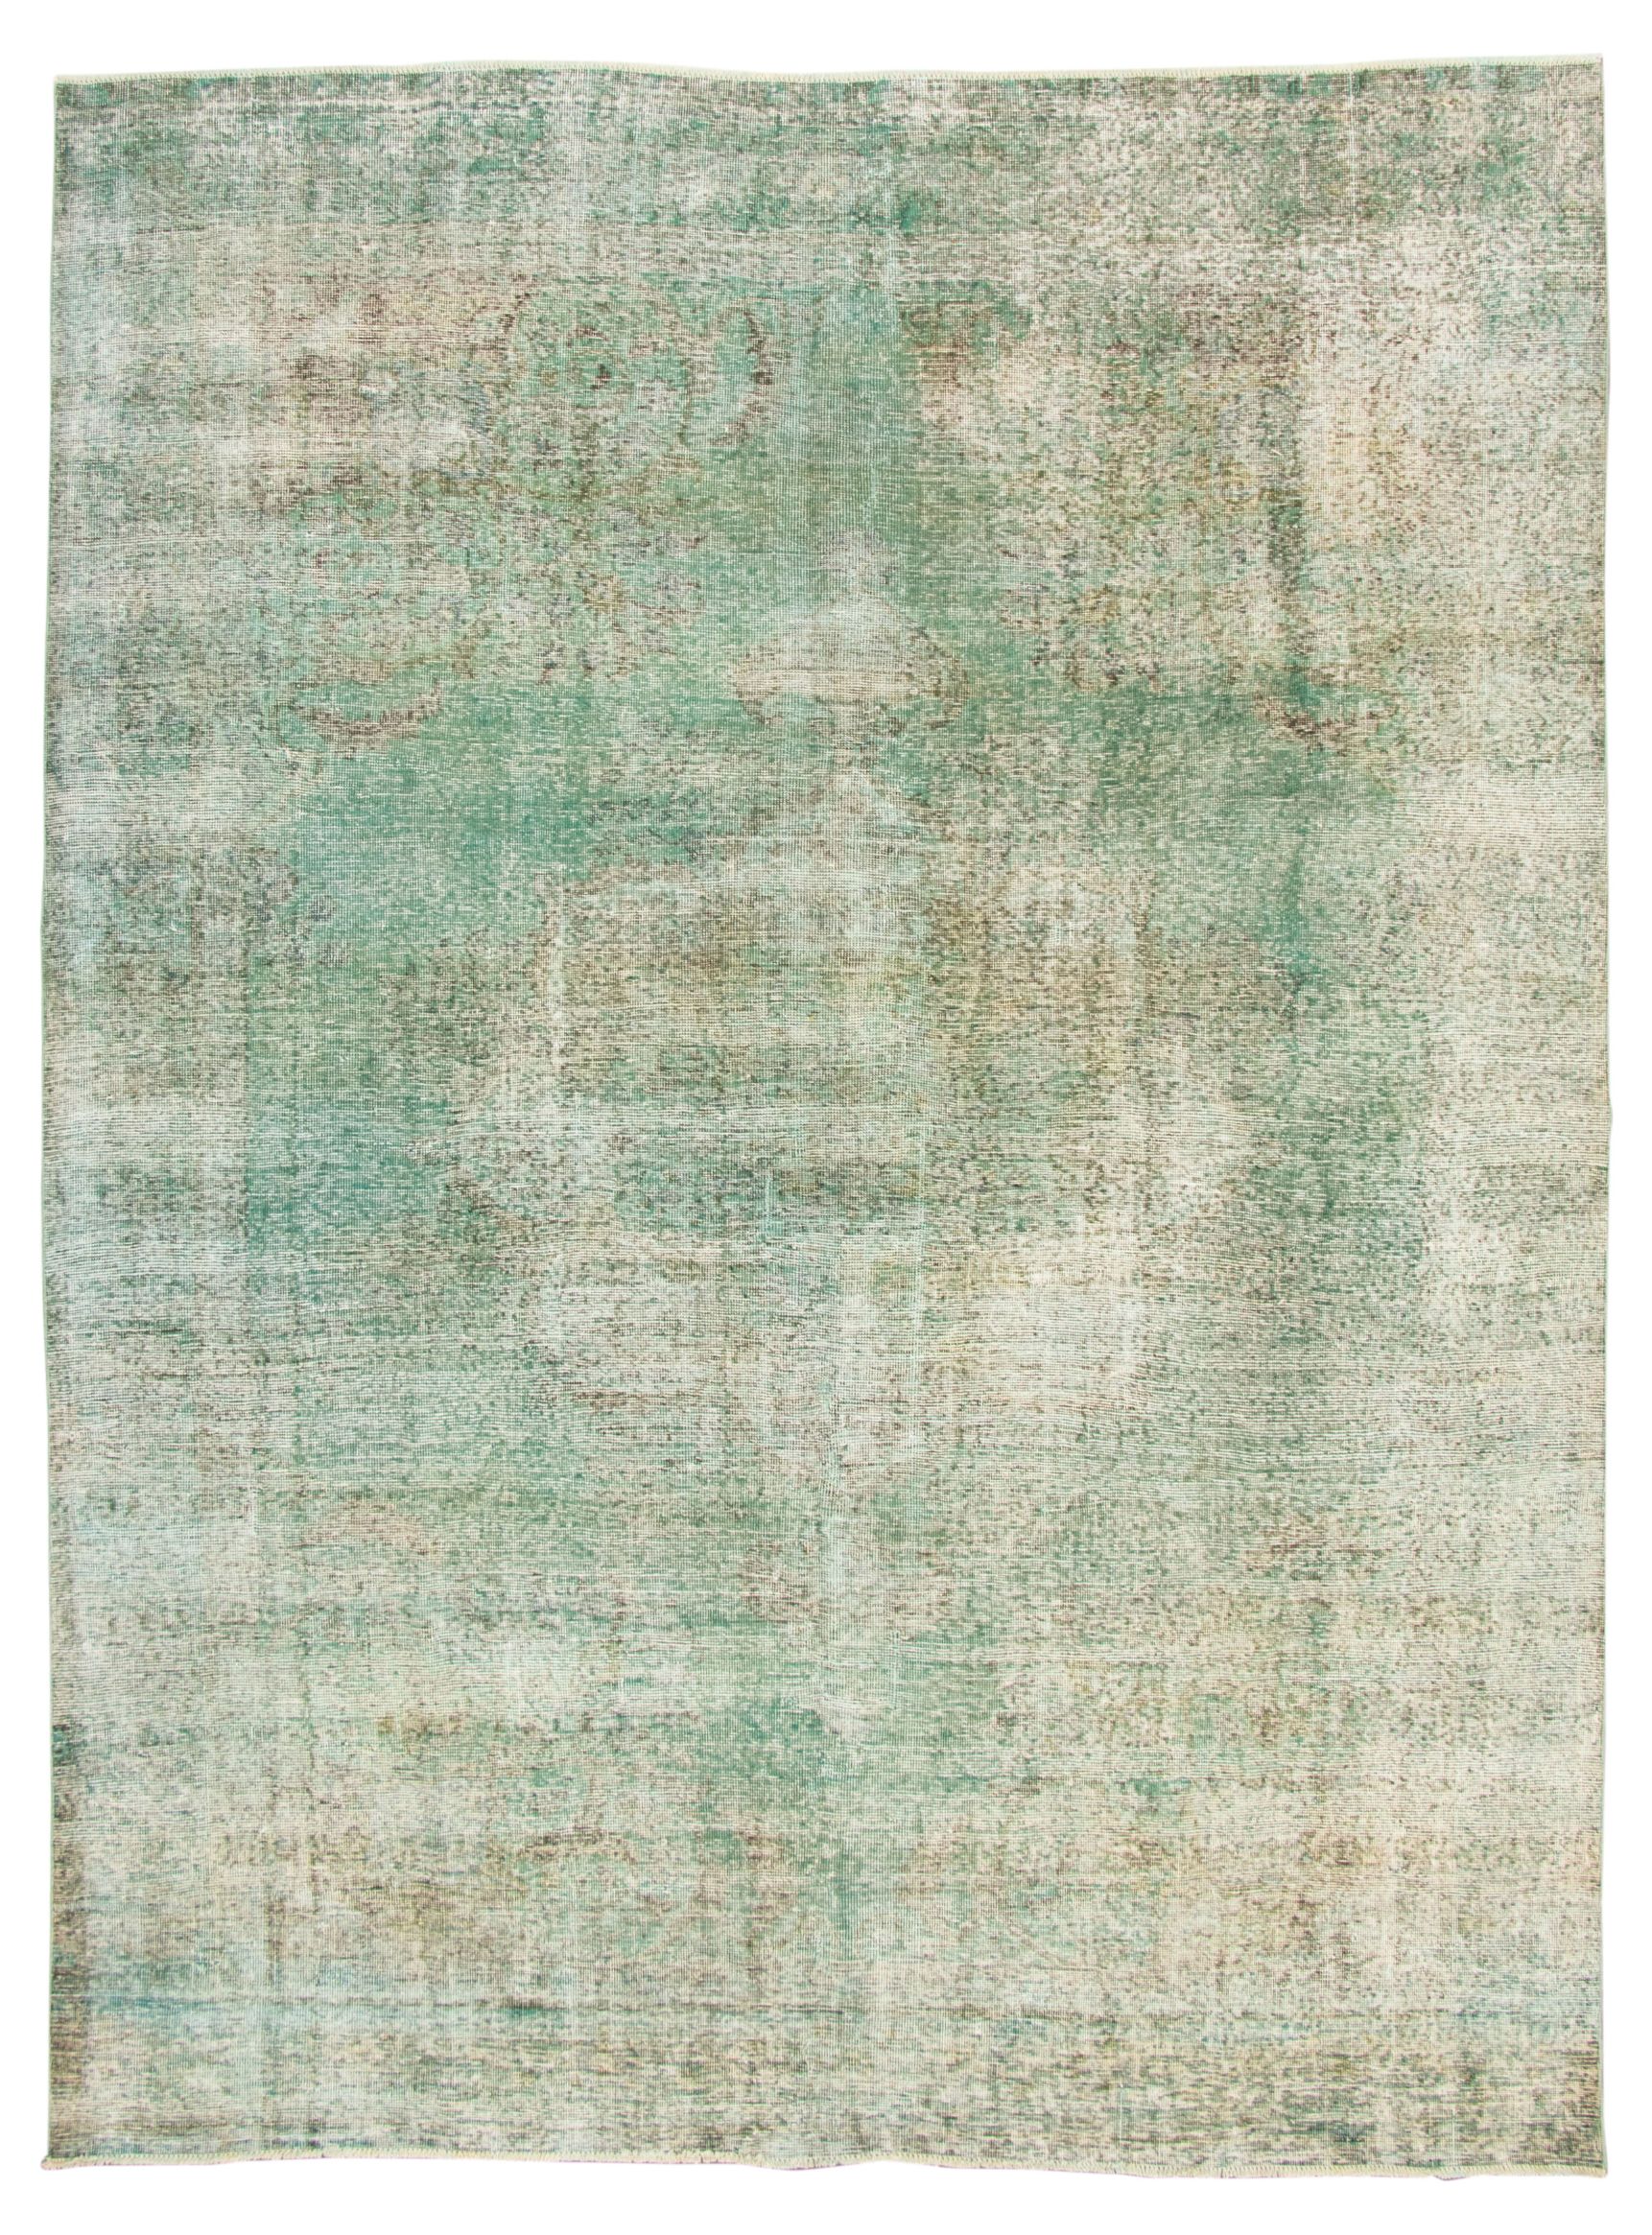 Hand-knotted Color Transition Teal Wool Rug 9'3" x 12'2" Size: 9'3" x 12'2"  